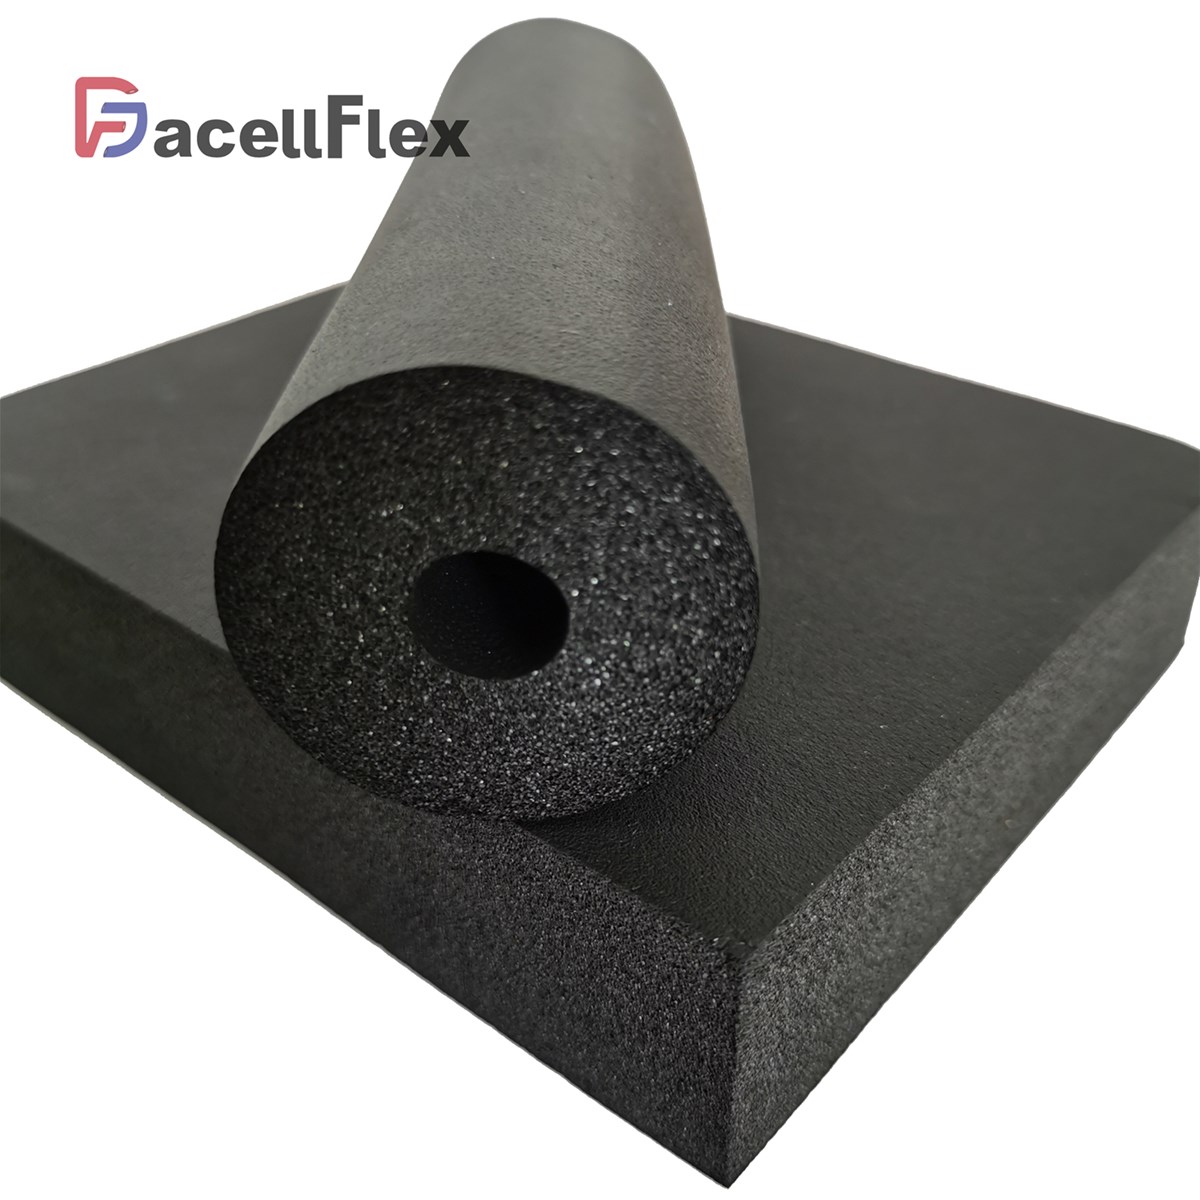 Dacellflex Factory Elastomeric NBR PVC Rubber Foam Closed Cell Thermal Insulation Colorful High Density Sound Insulation